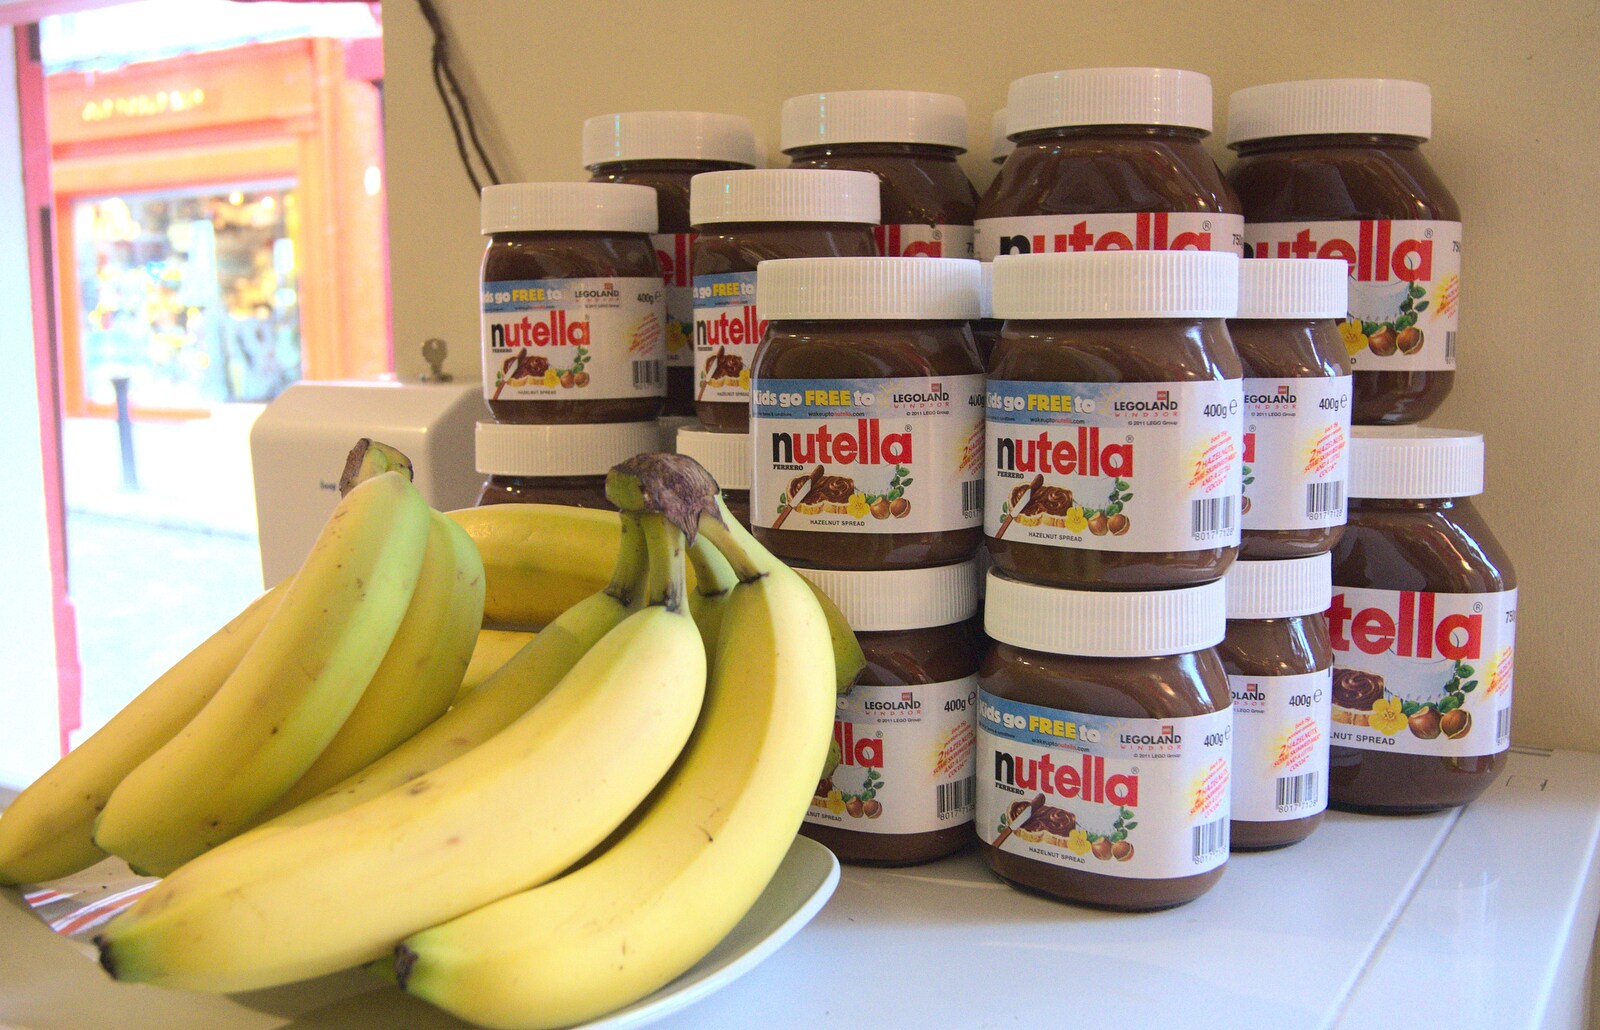 A Day in Dublin, Ireland - 7th January 2012: The pancake café has just a few jars of Nutella